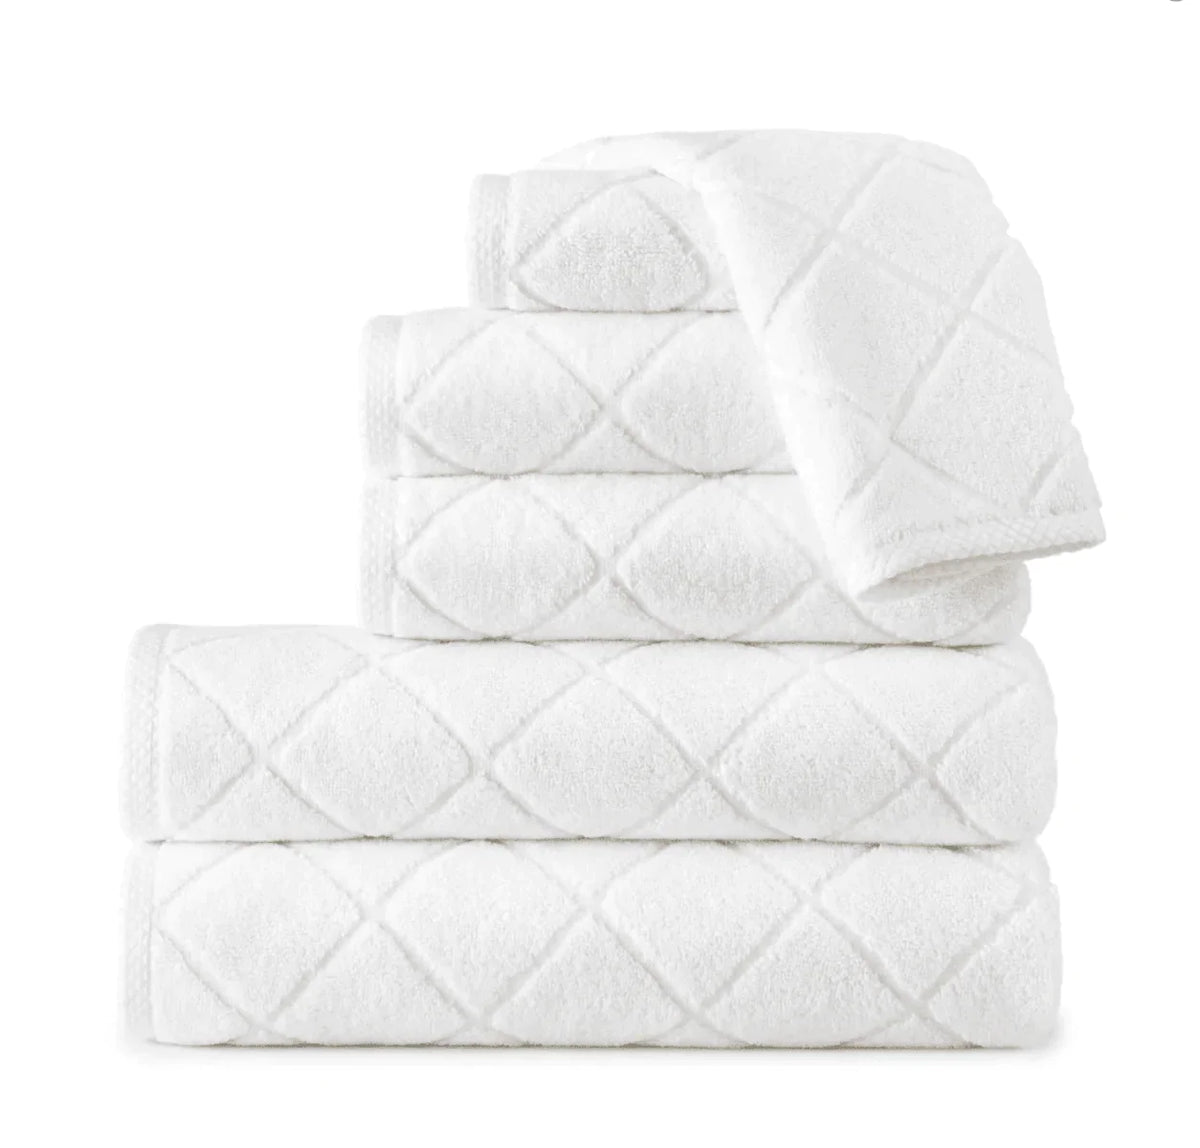 http://www.wellappointedhouse.com/cdn/shop/files/diamond-design-terry-plush-cotton-bath-towel-collection-in-white-bath-towels-the-well-appointed-house_ed79800d-2622-4f96-9744-bc40b935f5d8_1200x1200.webp?v=1691677559